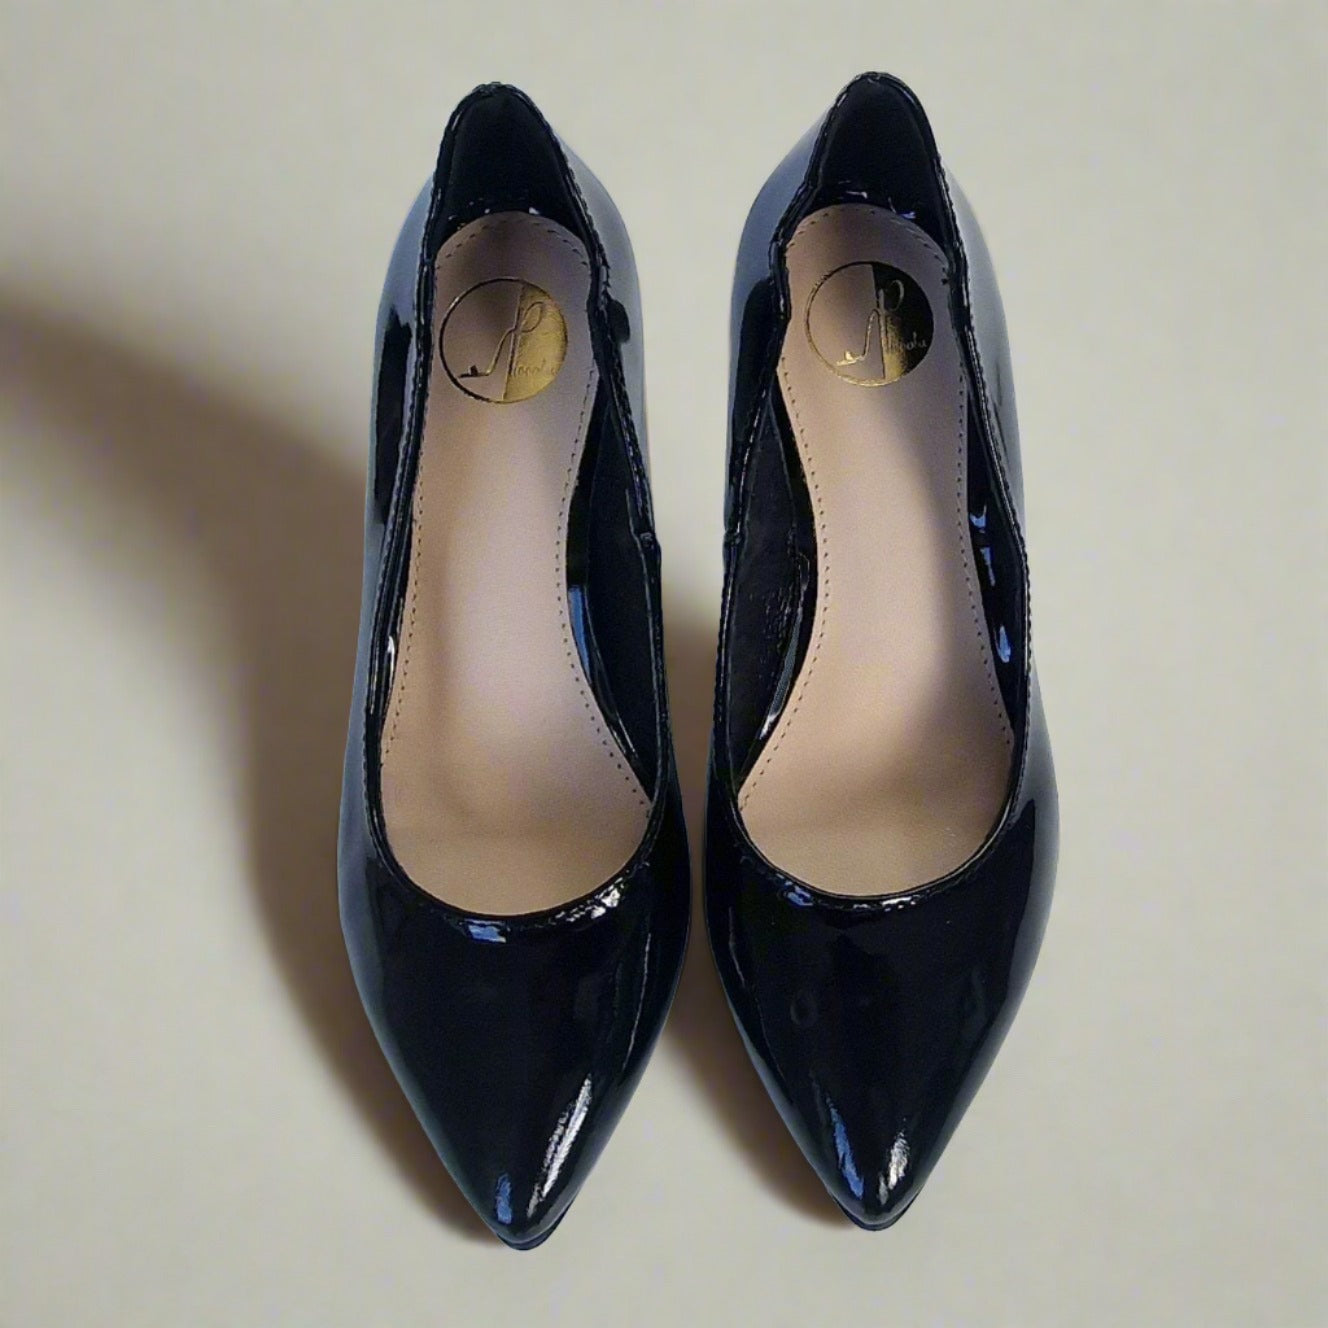 Pointed toe courts in black patent leather